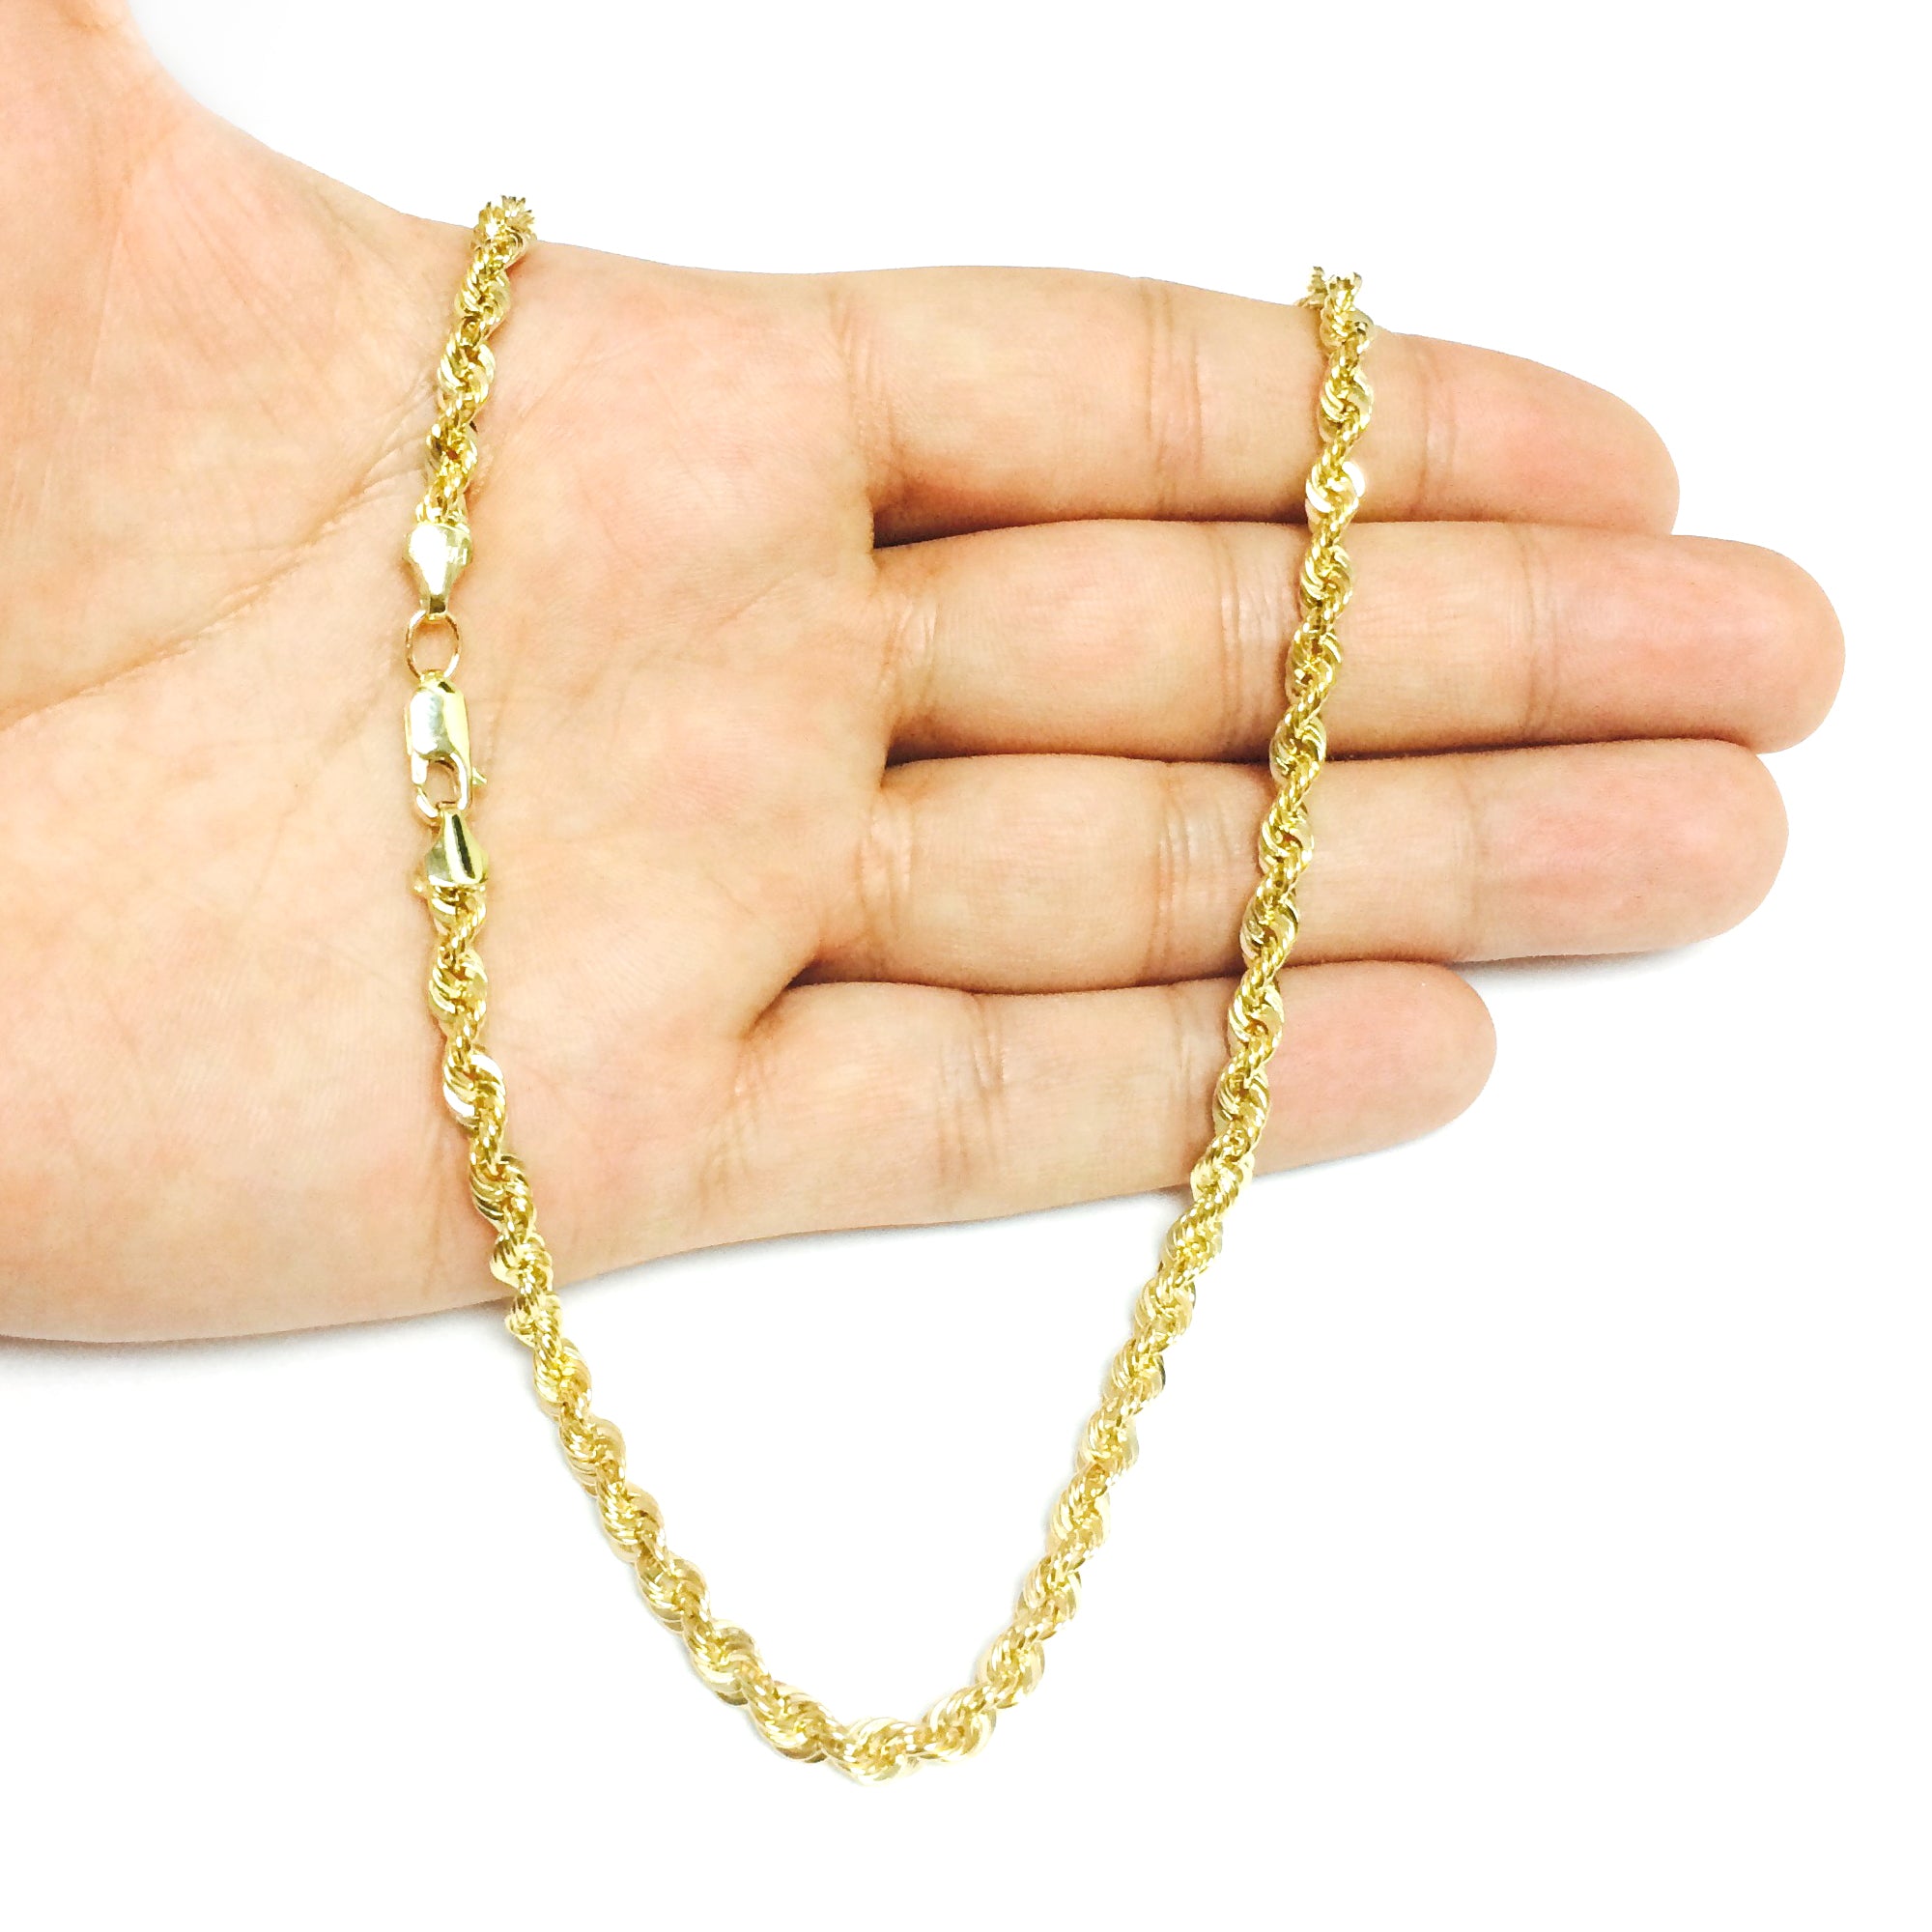 14K Yellow Gold Filled Solid Rope Chain Necklace, 4.5mm Wide fine designer jewelry for men and women